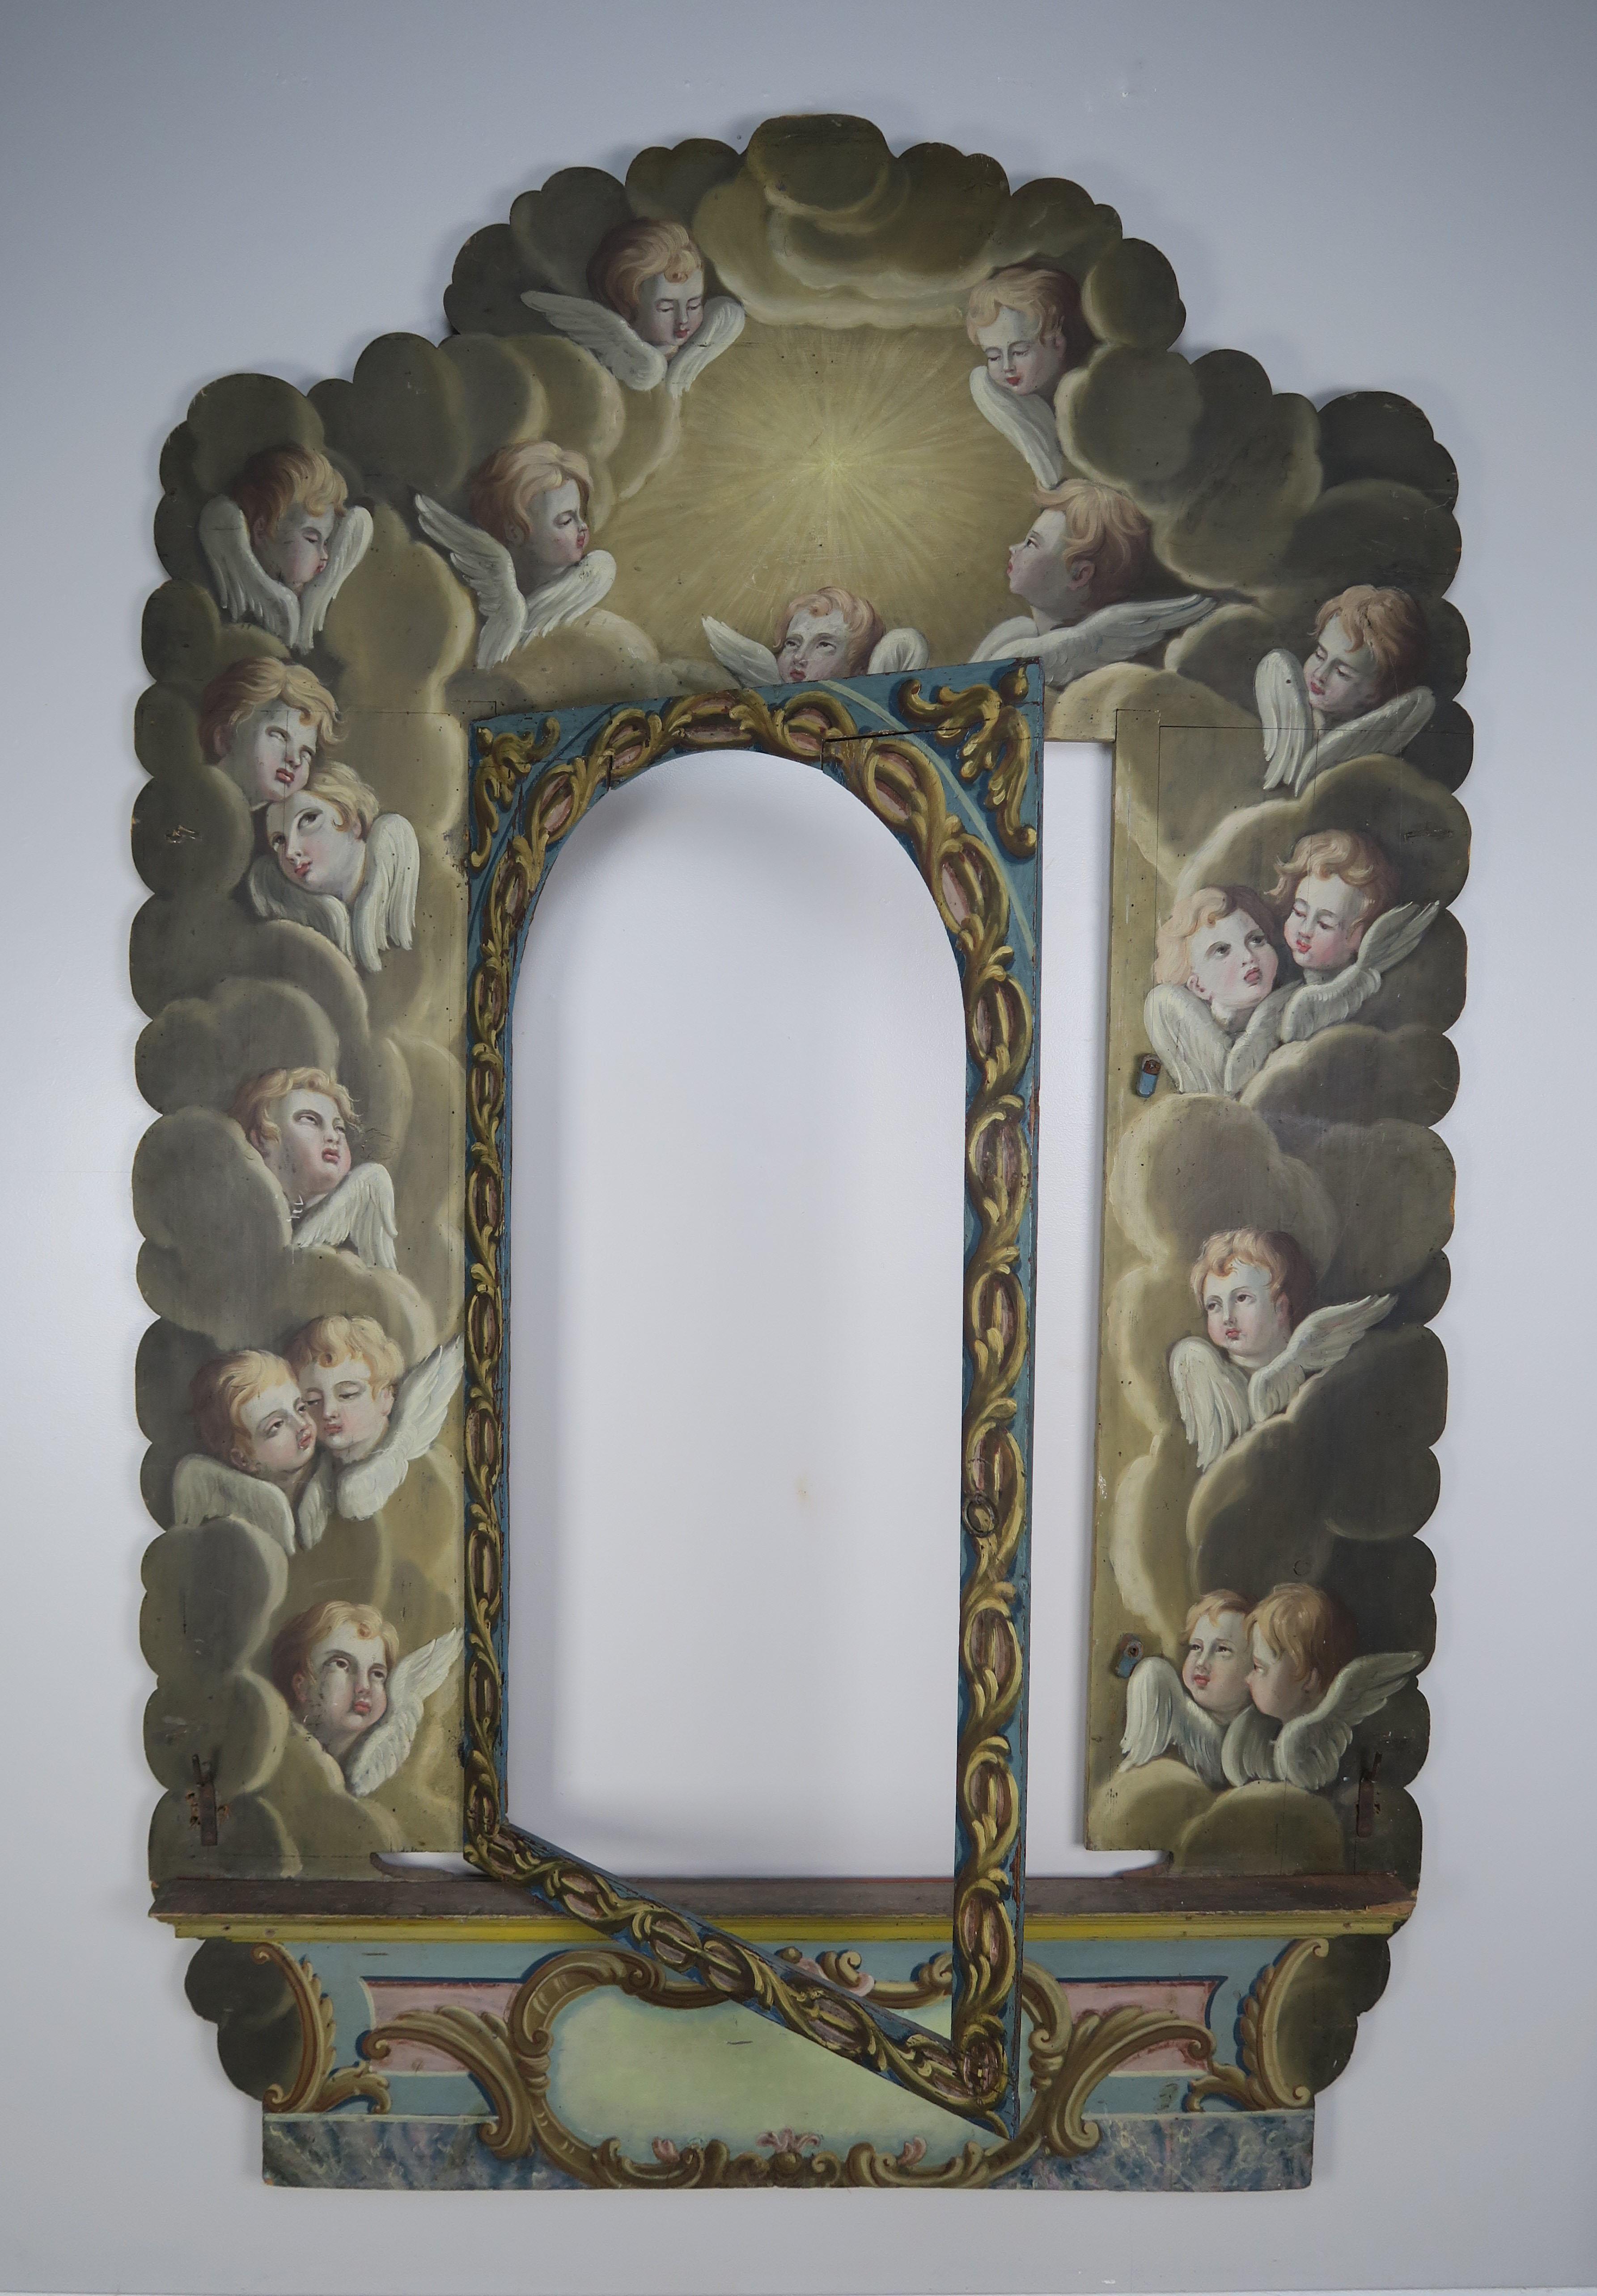 Incredible hand painted frame with cherub faces intricately painted throughout floating throughout clouds as though they are ascending towards heaven.